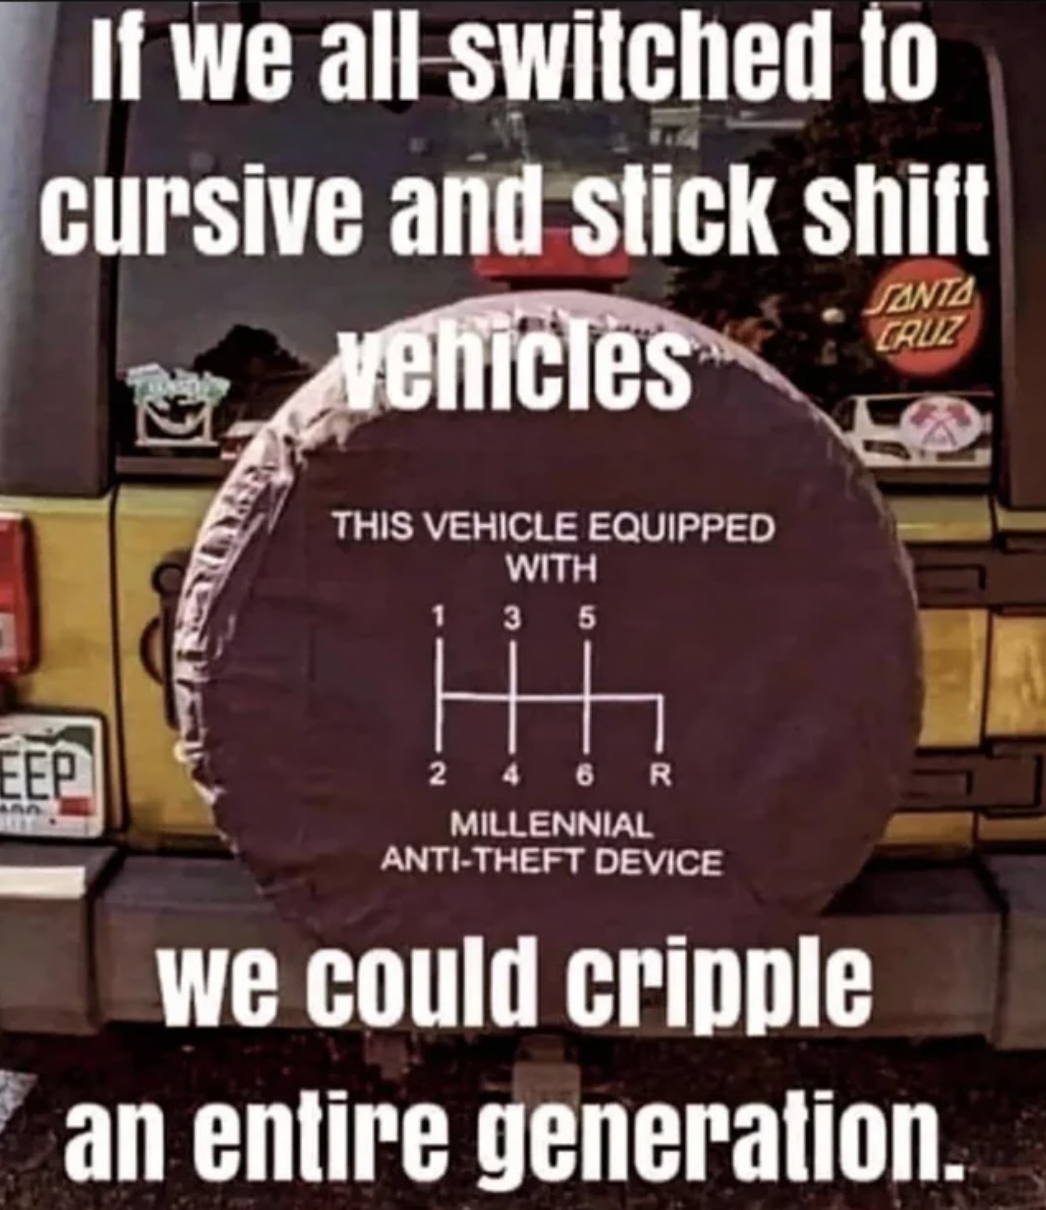 If we all switched to cursive and stick shift vehicles